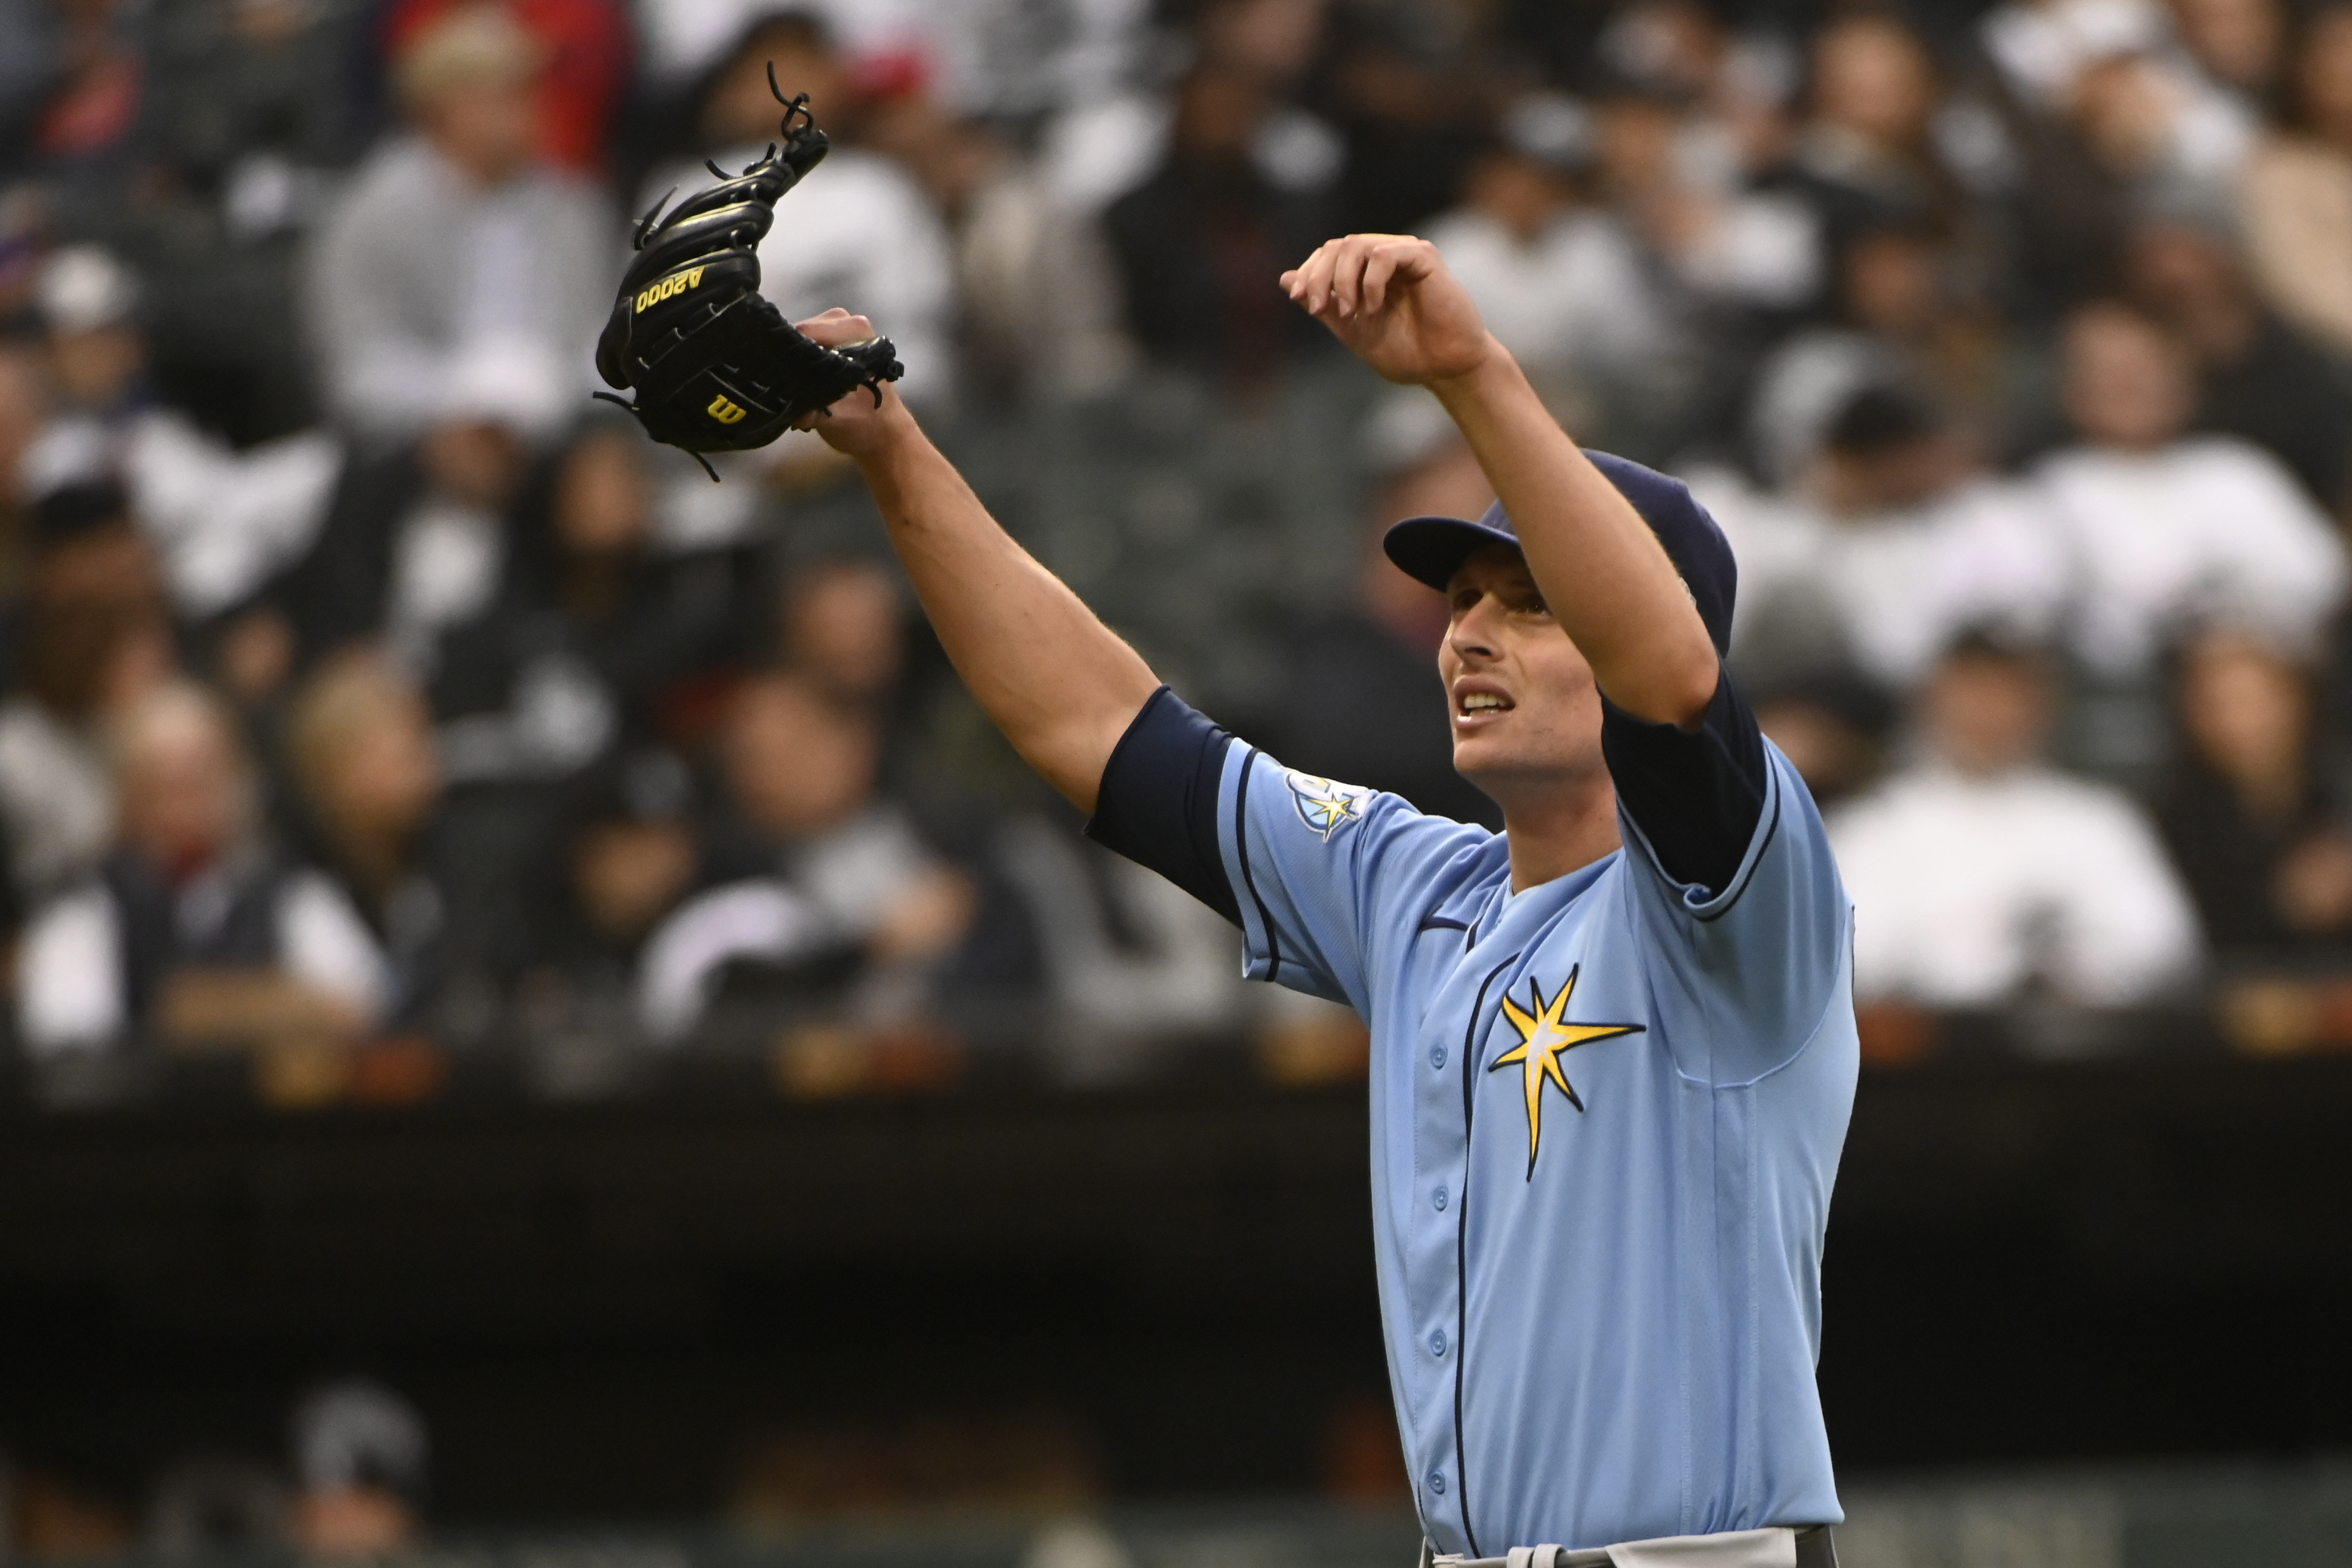 CHICAGO, IL - APRIL 29: Tampa Bay Rays left fielder Randy